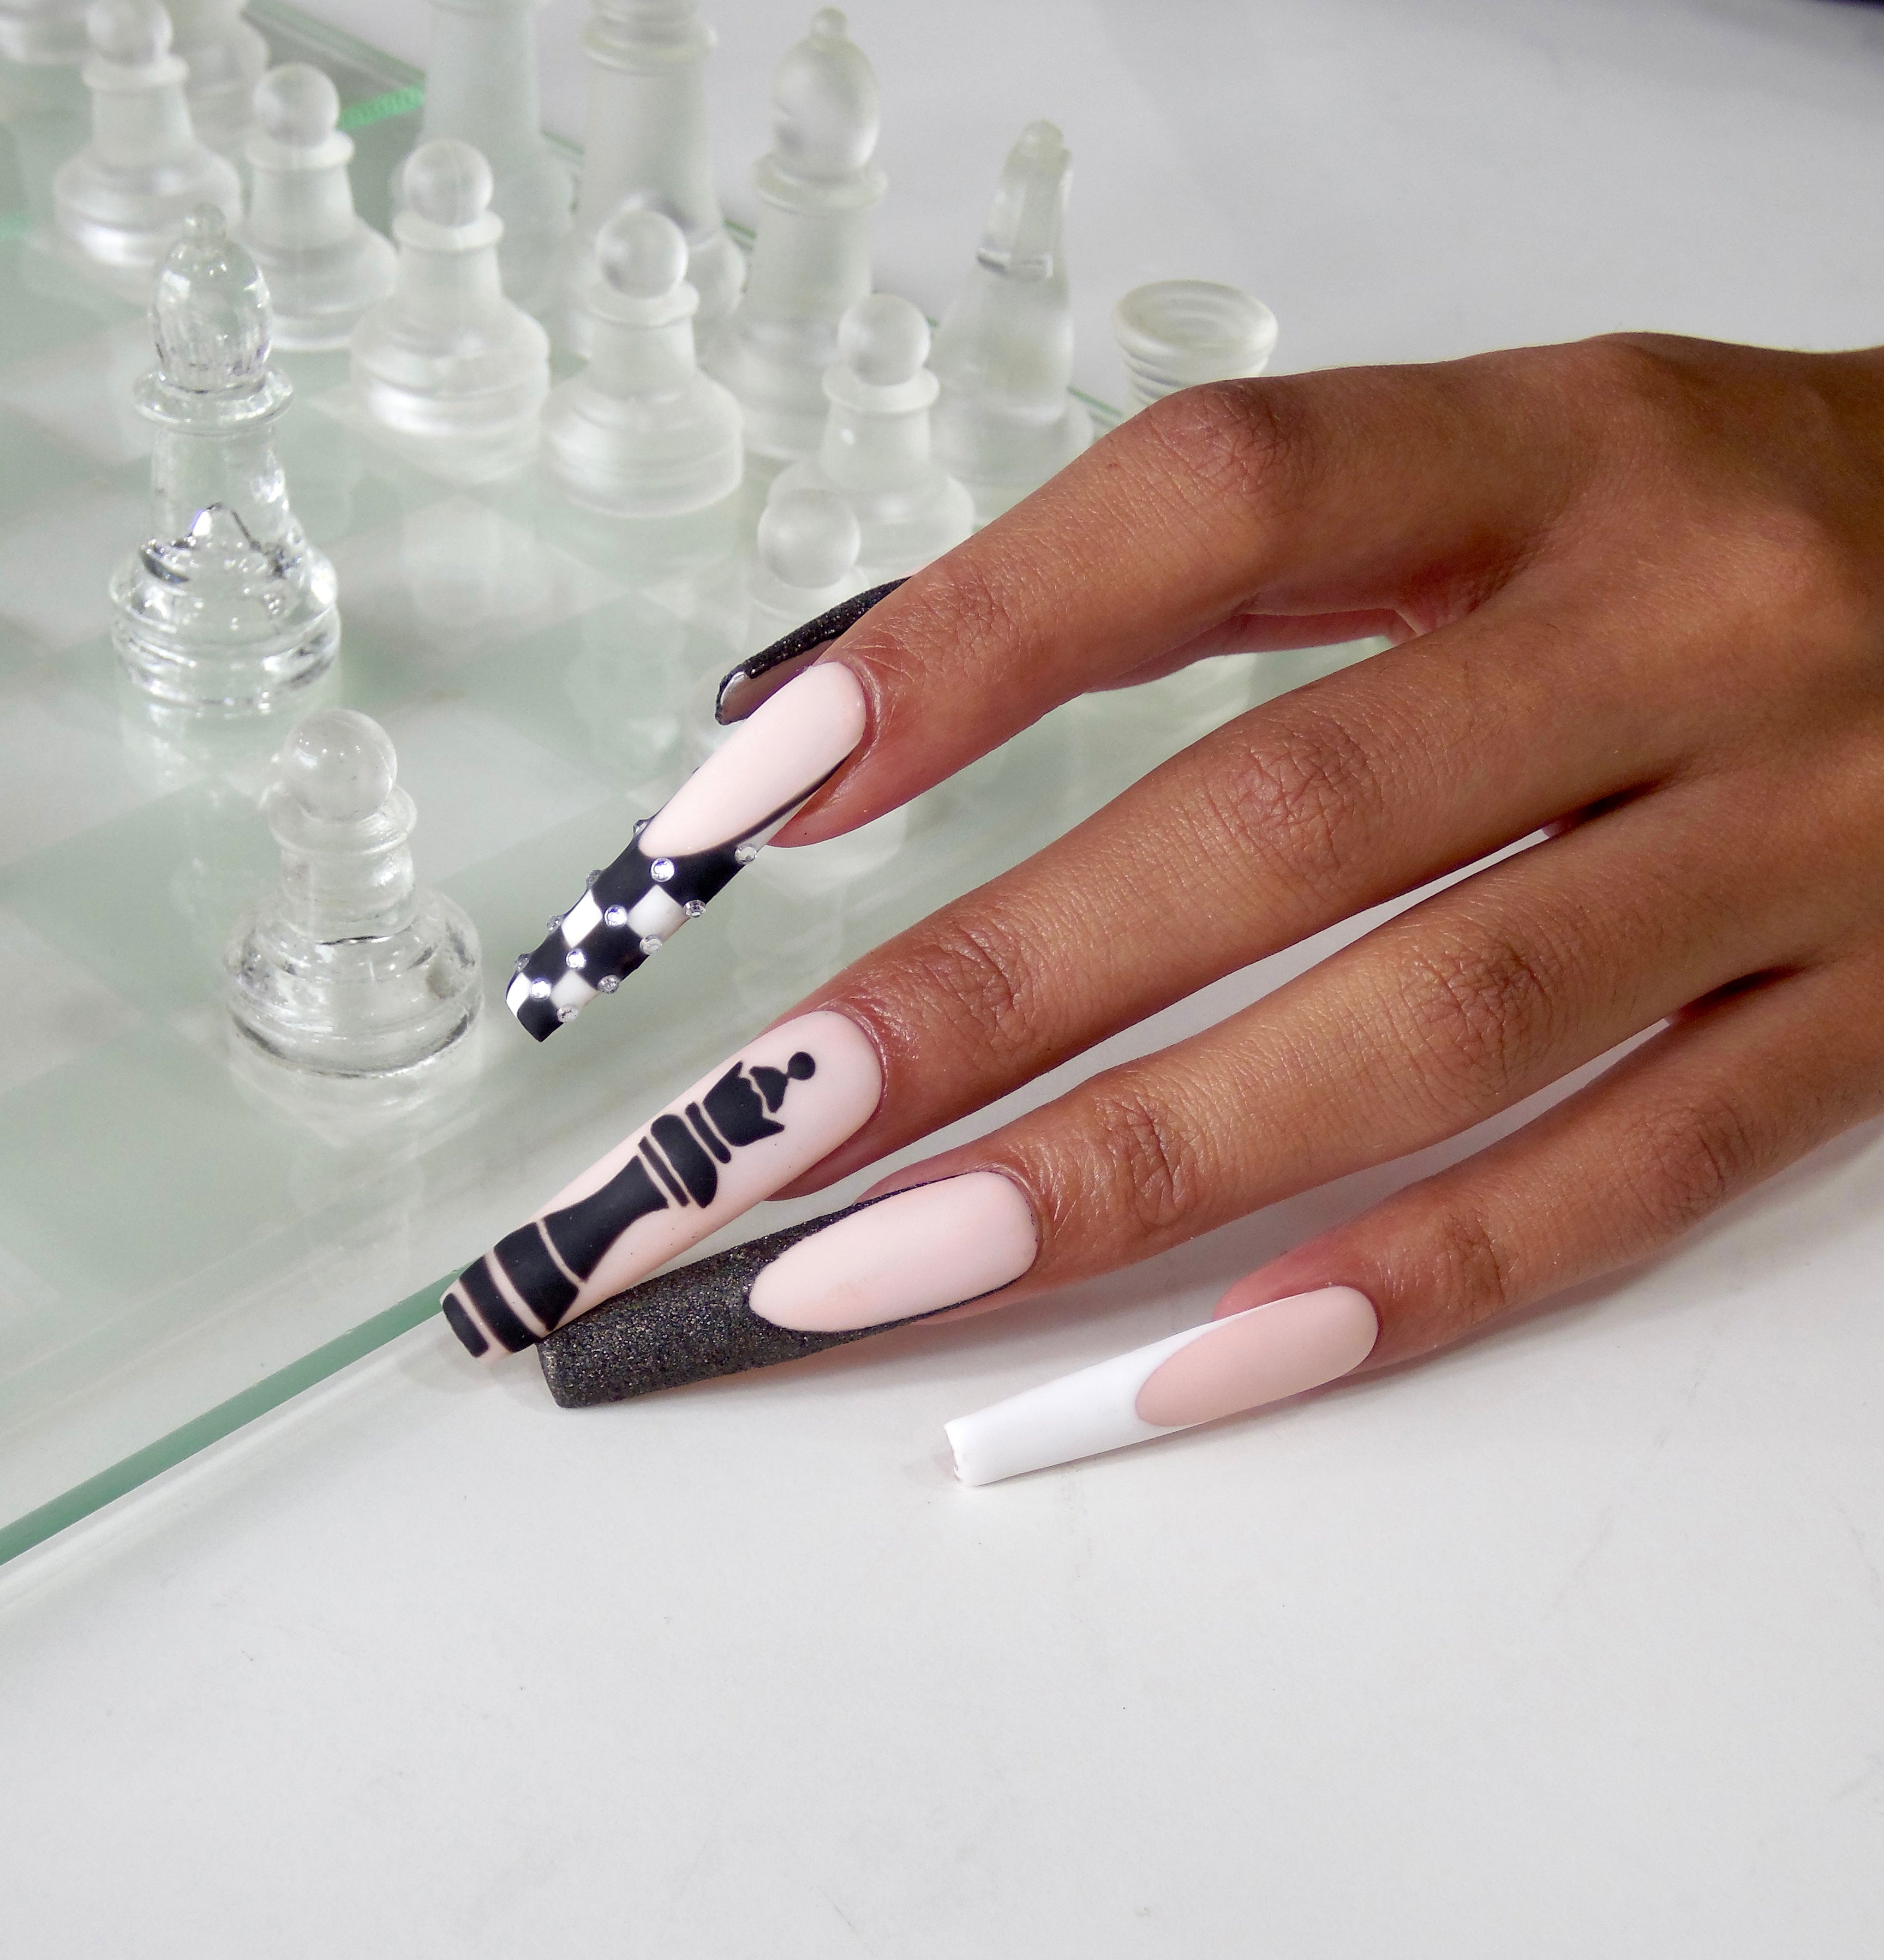 Mastering Gel Nail Application: Step-by-Step Guide